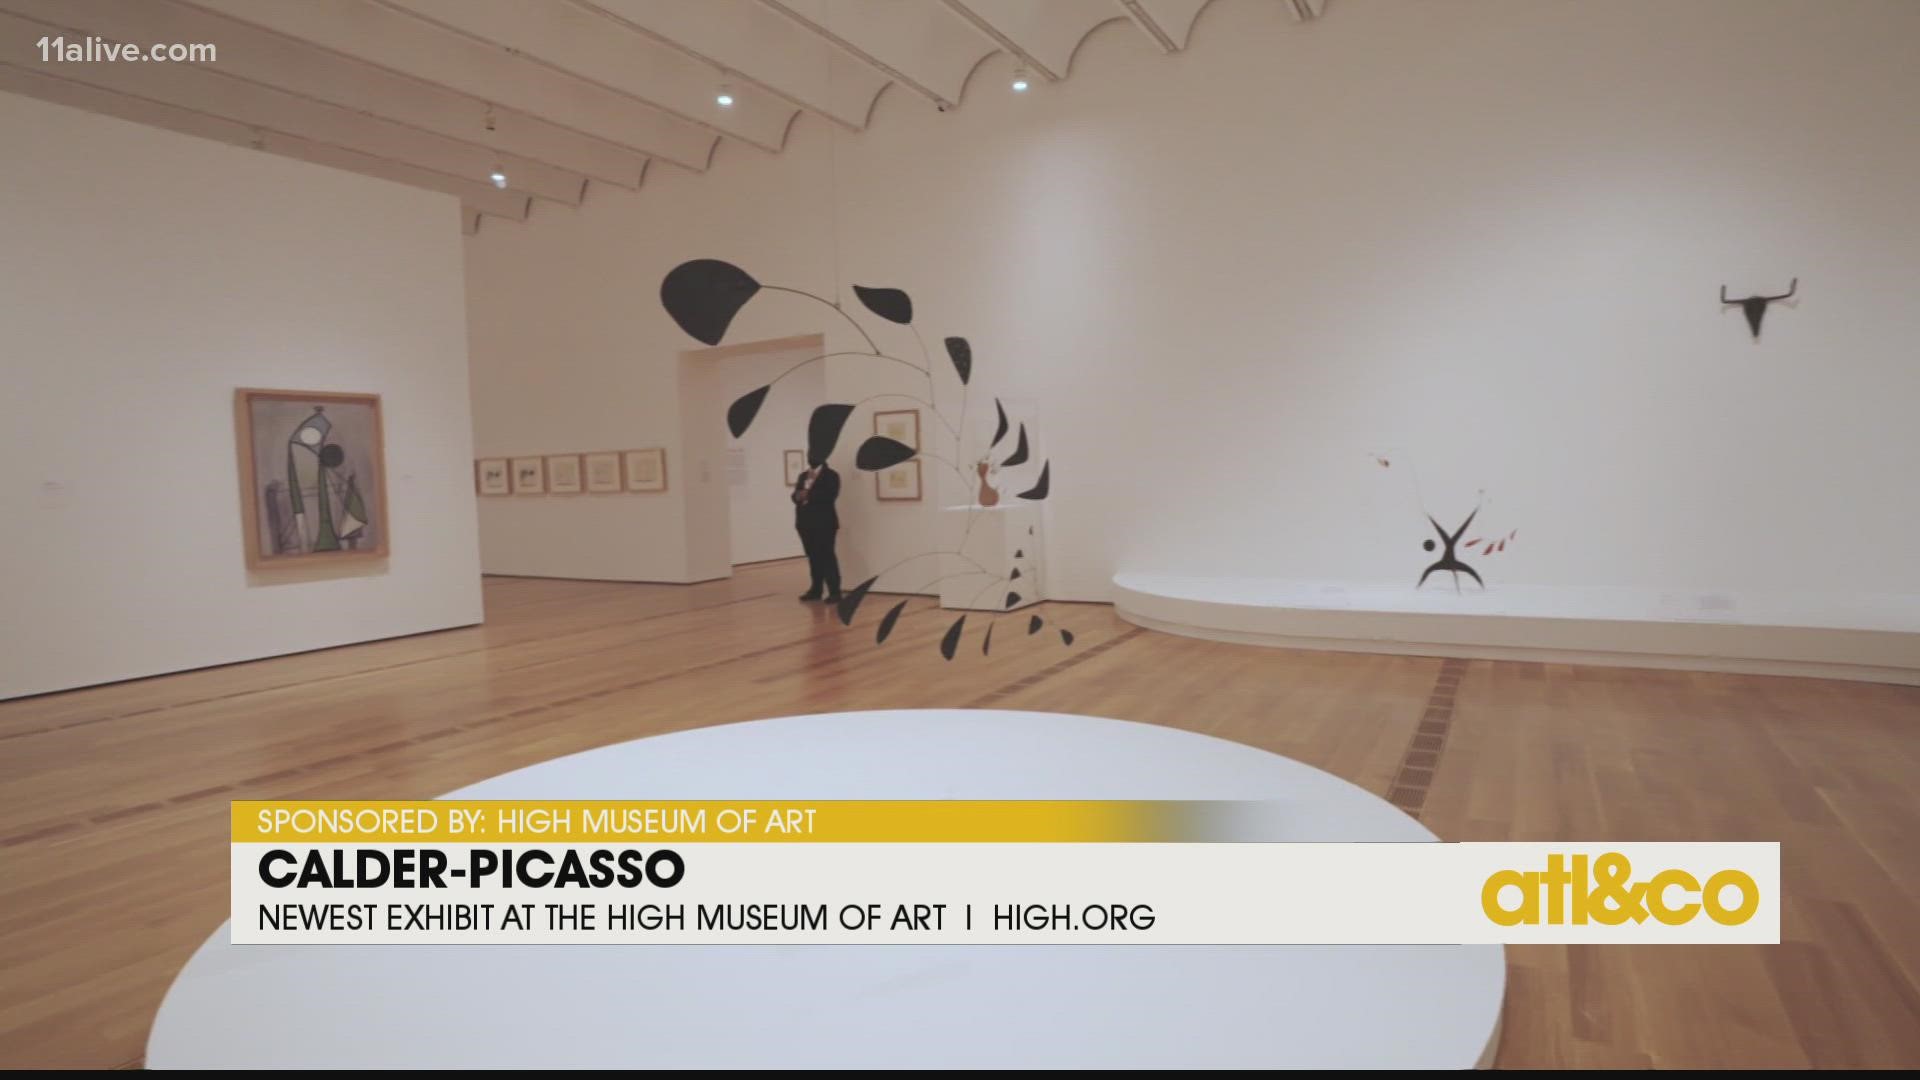 Check out the newest exhibit at High Museum of Art -- the 20th century works of Alexander Calder and Pablo Picasso.